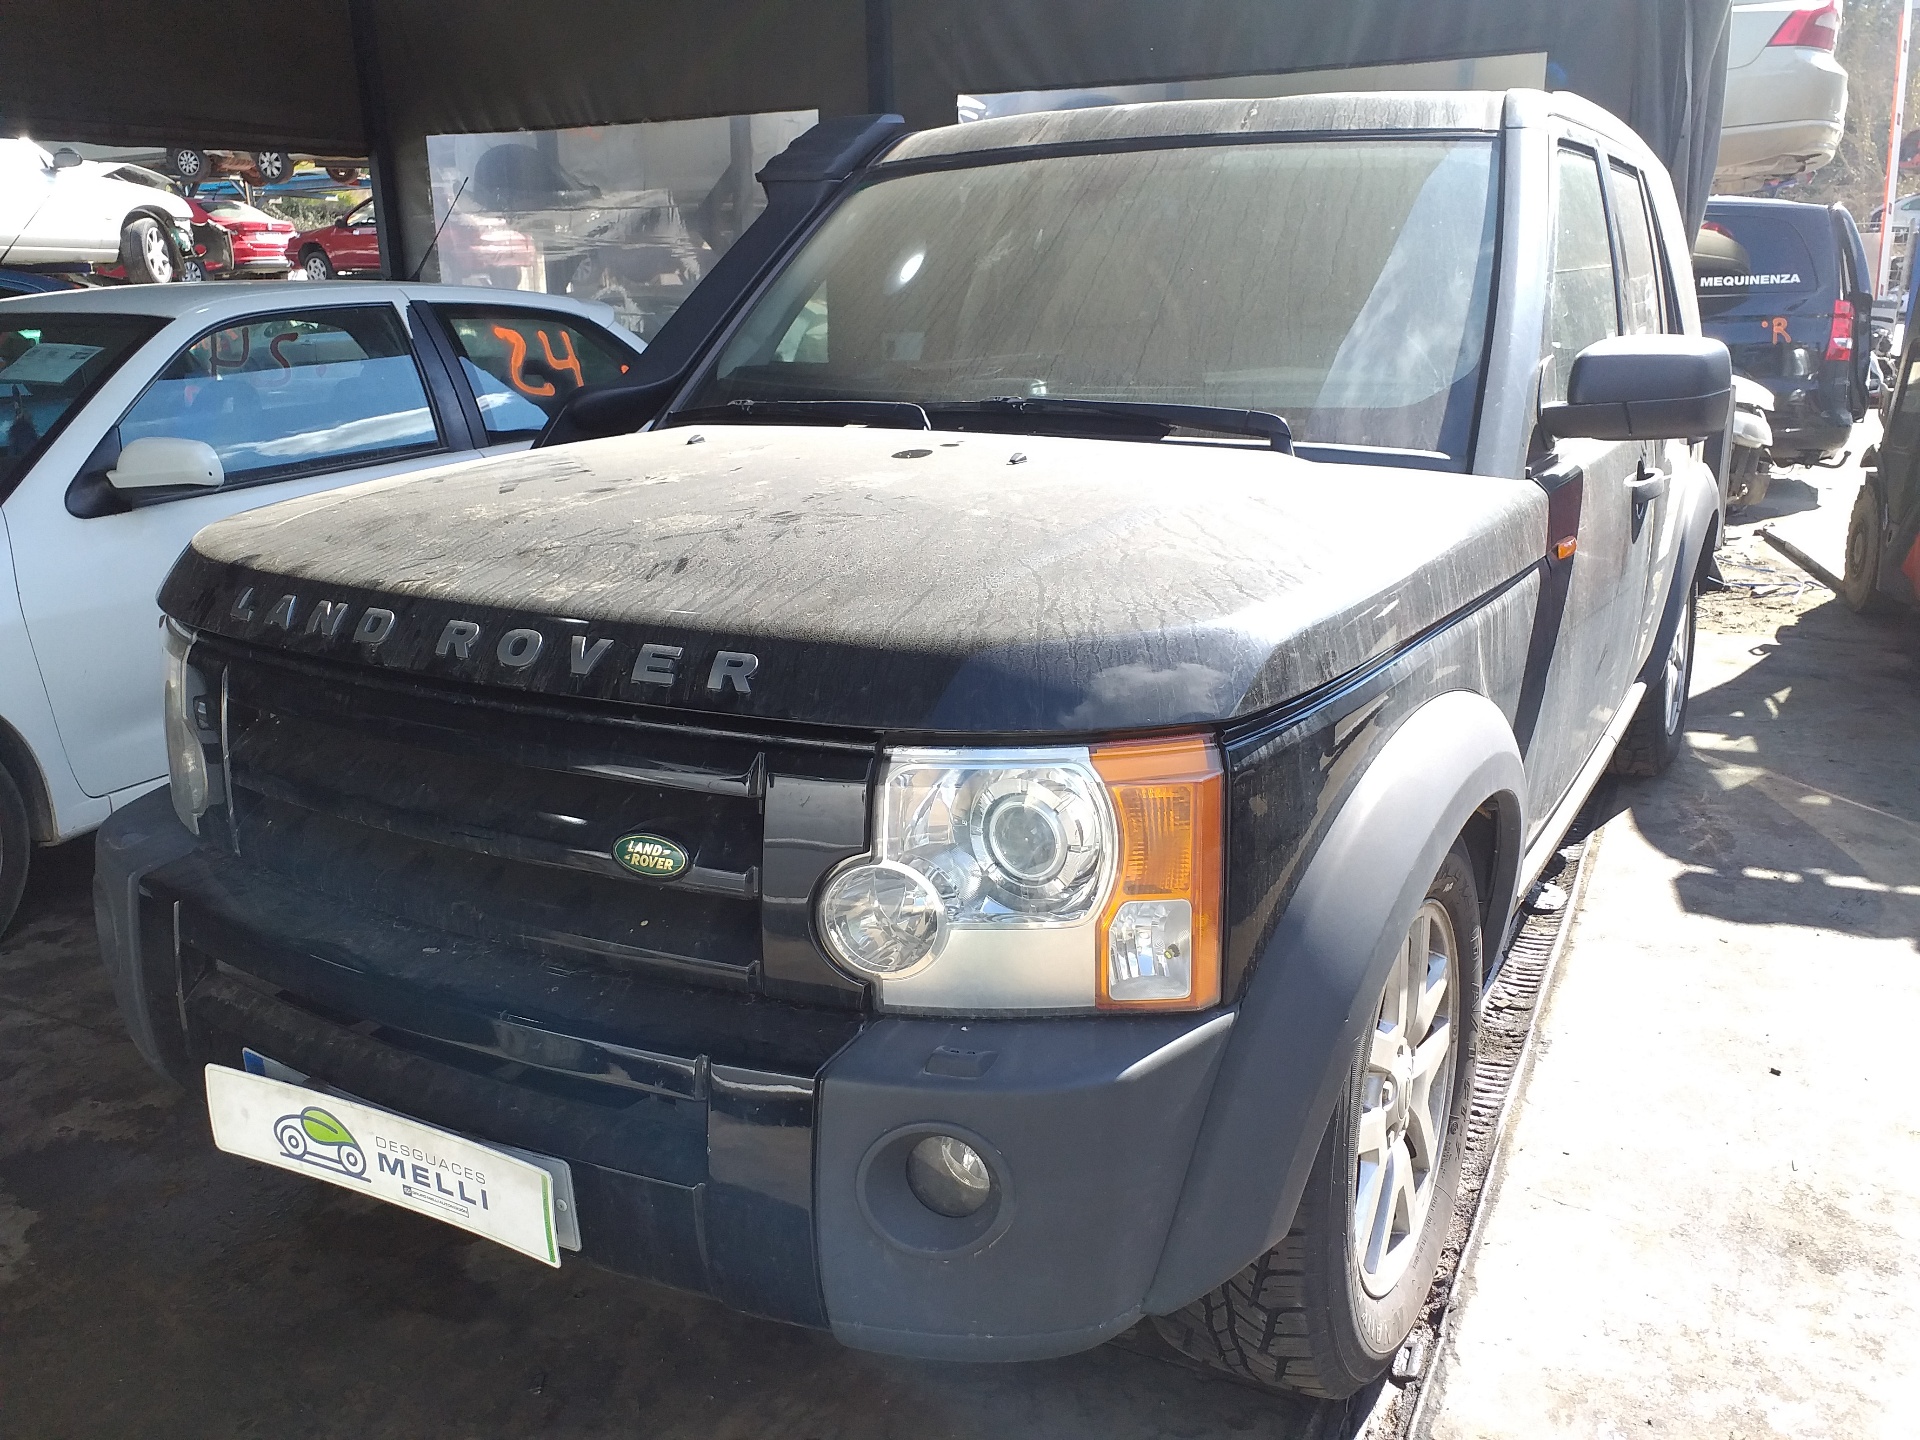 LAND ROVER Discovery 3 generation (2004-2009) Smagratis 4R836375AC 24043954